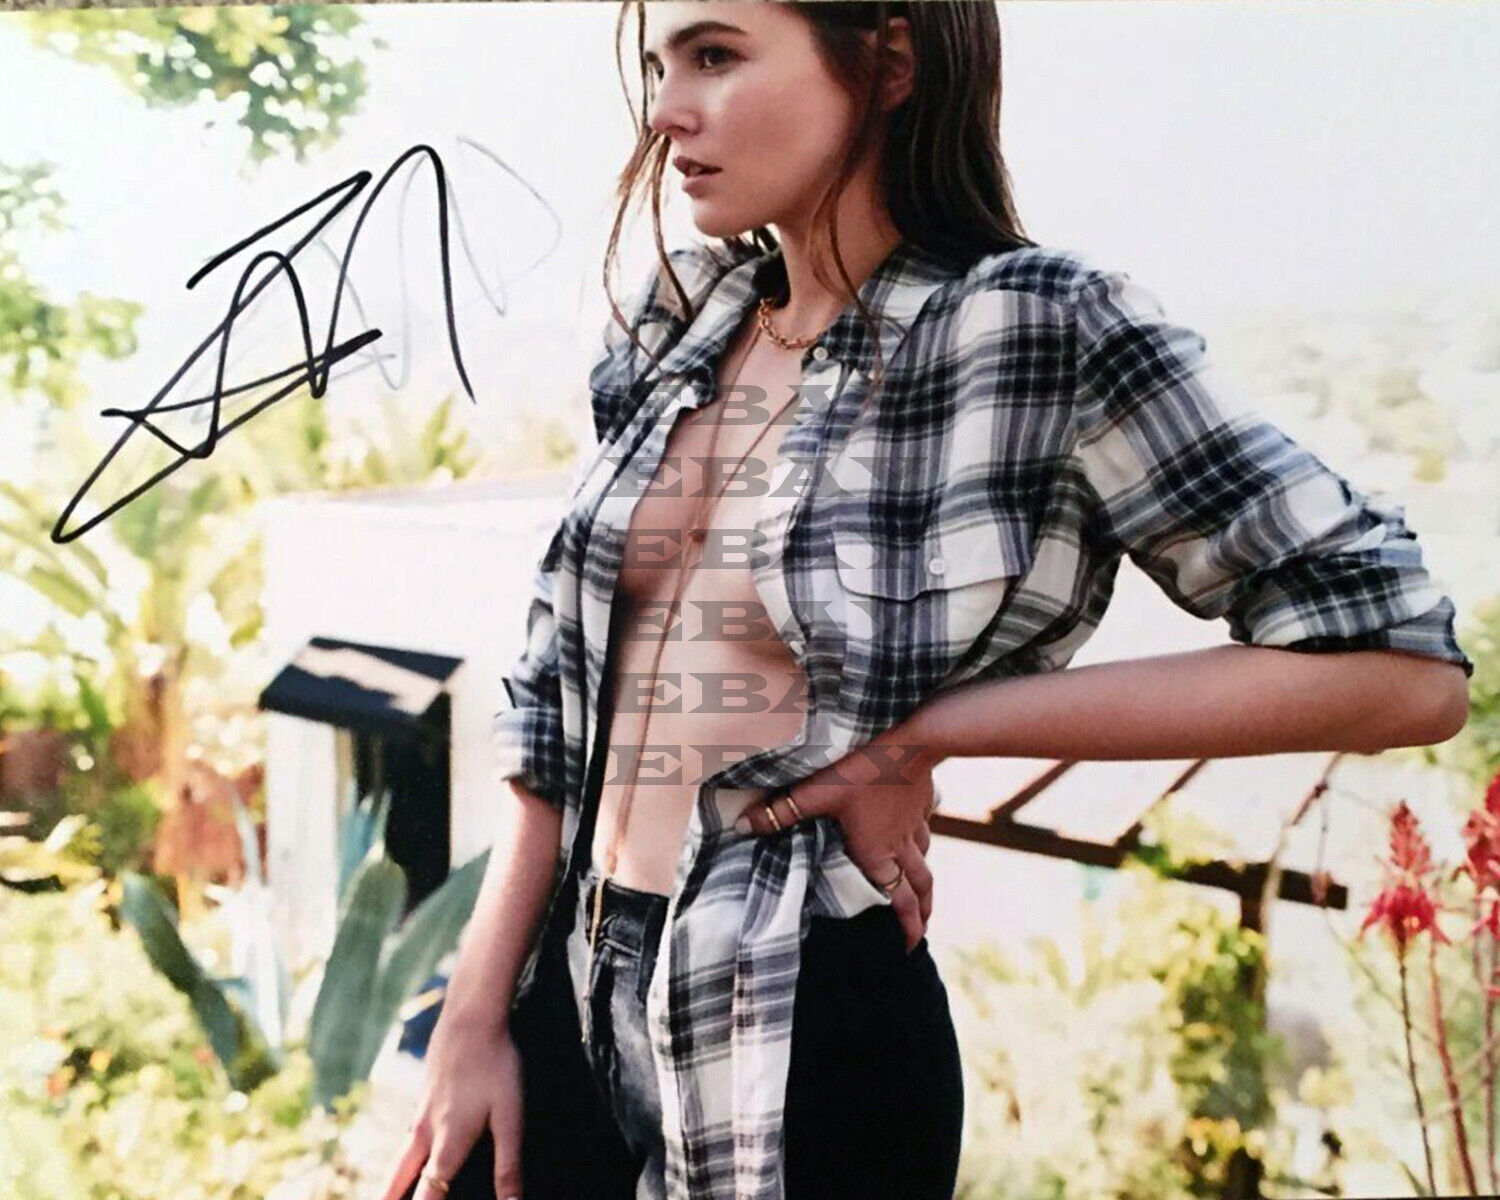 ZOEY DEUTCH DIRTY GRANDPA Autographed 8x10 Photo Poster painting Signed REPRINT